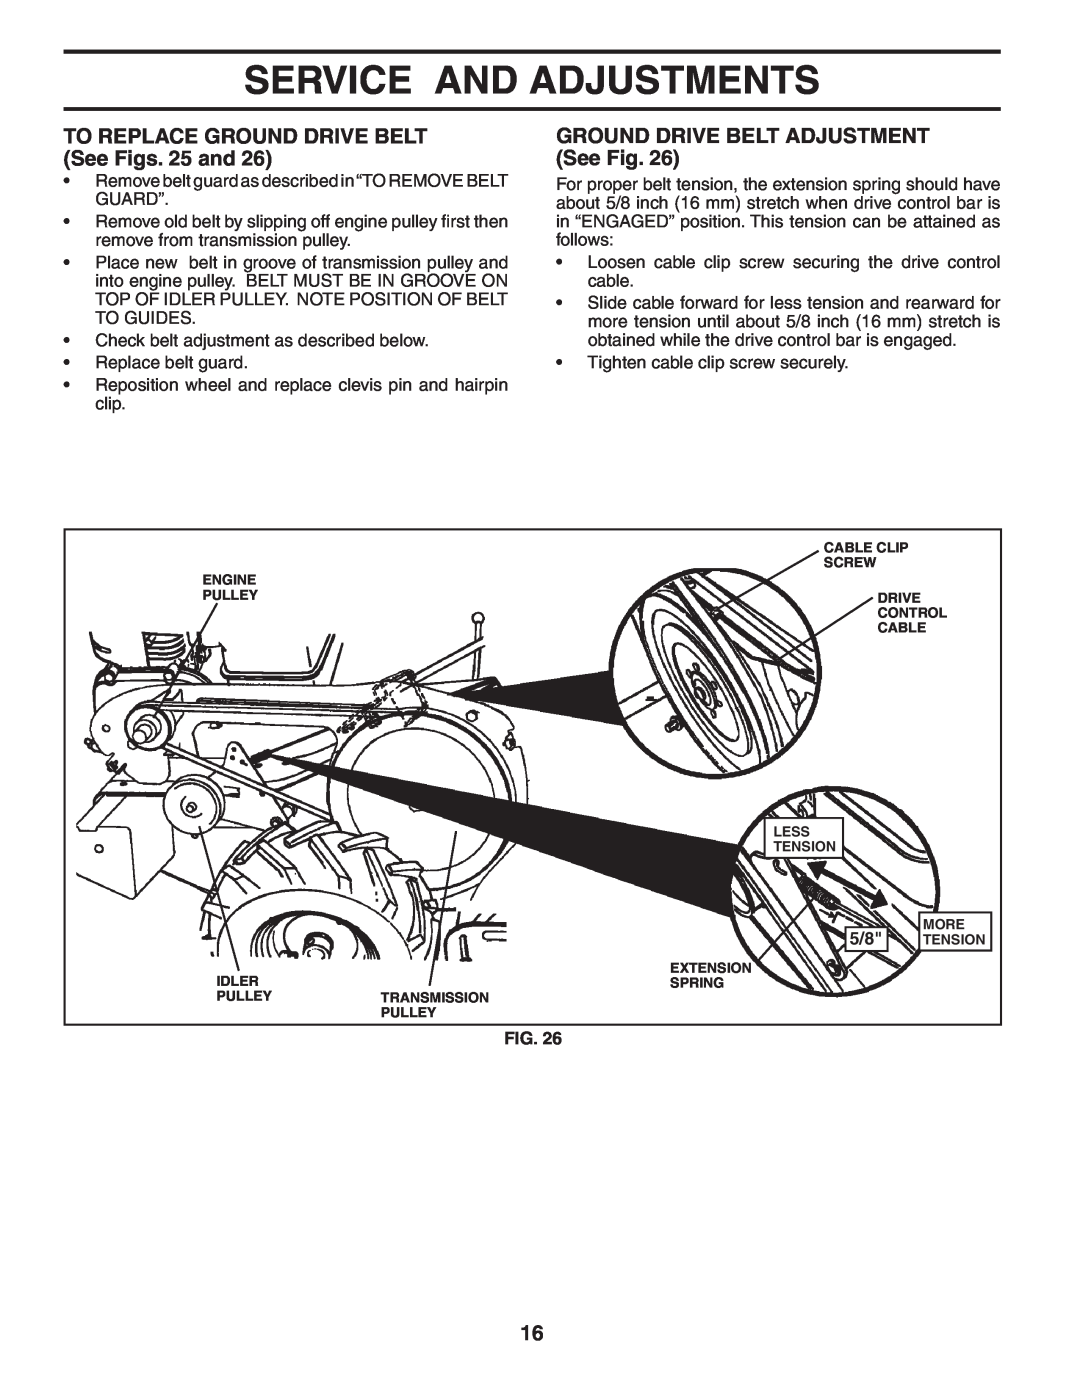 Poulan DRT65 TO REPLACE GROUND DRIVE BELT See Figs. 25 and, GROUND DRIVE BELT ADJUSTMENT See Fig, Service And Adjustments 